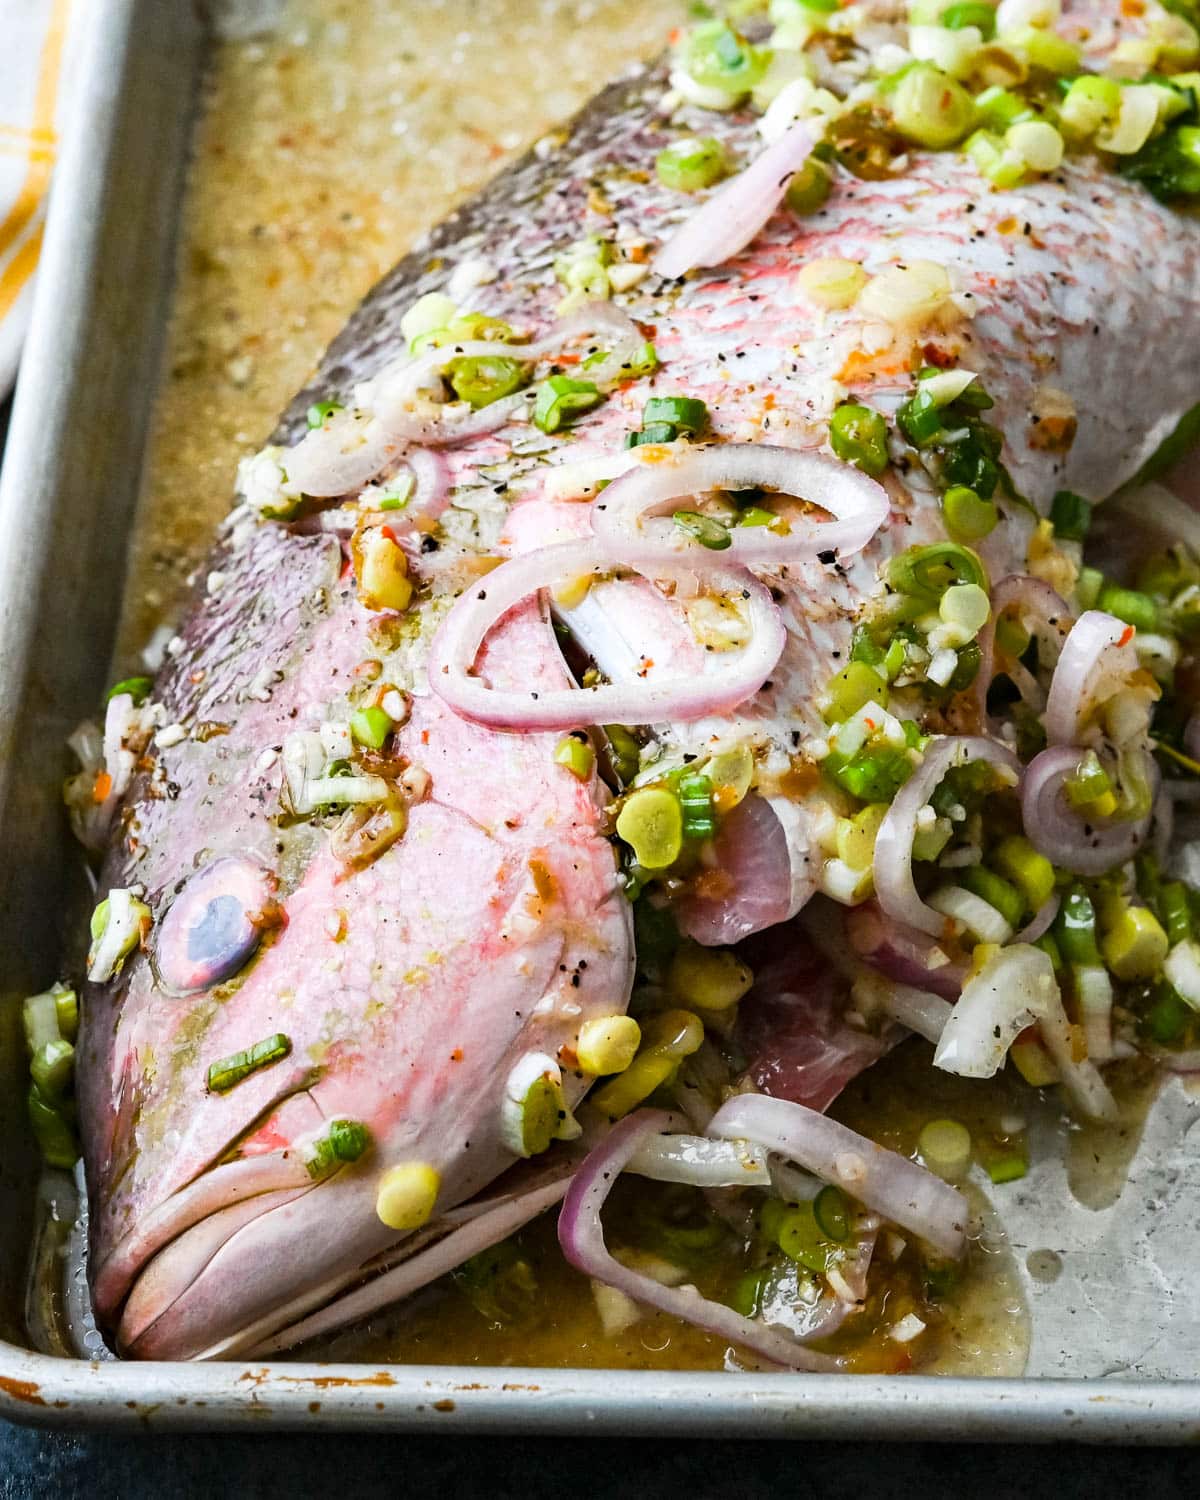 Marinating the snapper with the Caribbean marinade.